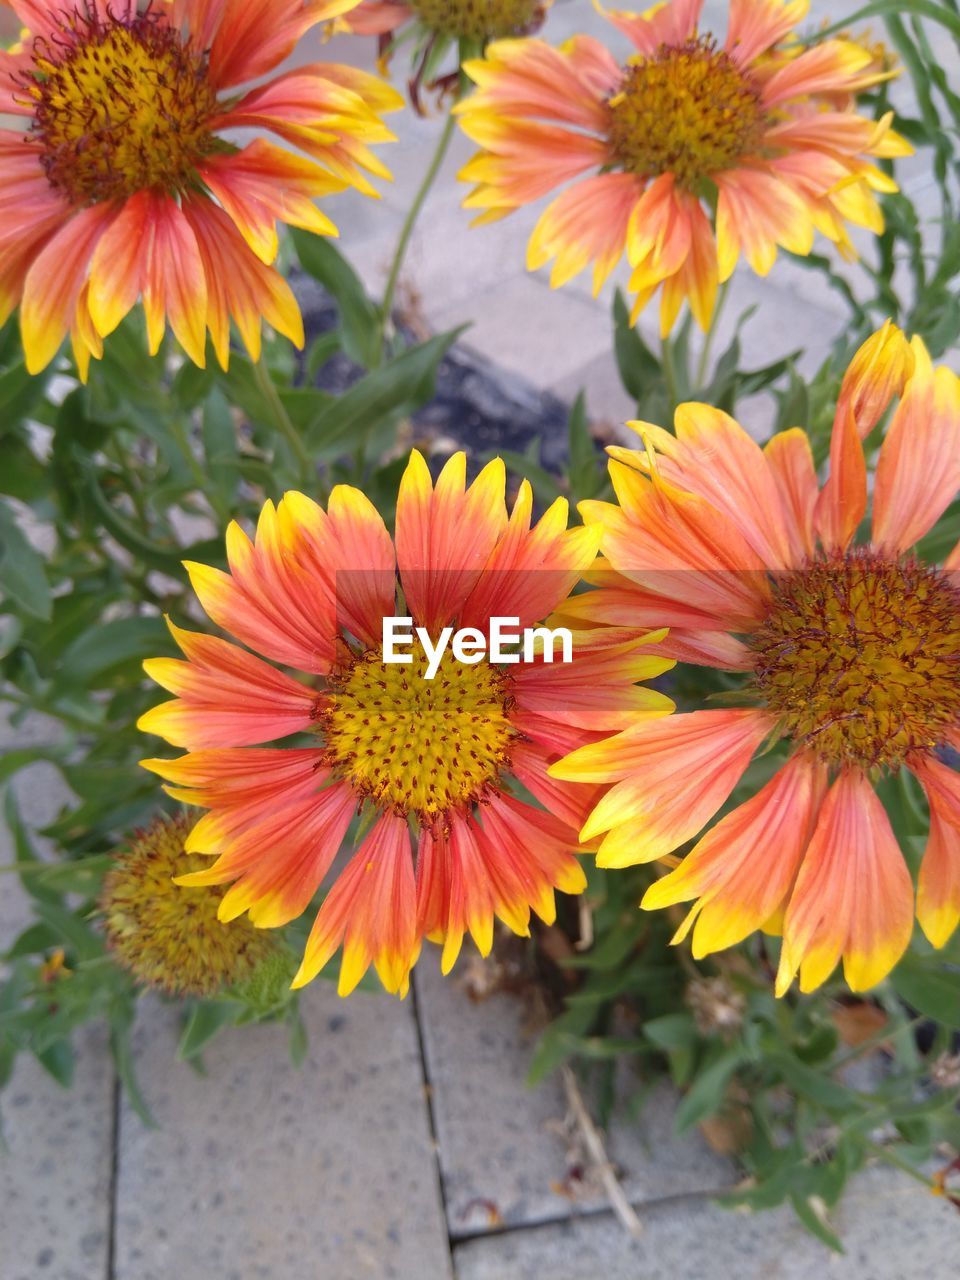 flower, flowering plant, plant, freshness, beauty in nature, flower head, petal, fragility, growth, inflorescence, close-up, nature, blanket flowers, day, no people, yellow, high angle view, outdoors, orange color, focus on foreground, pollen, botany, multi colored